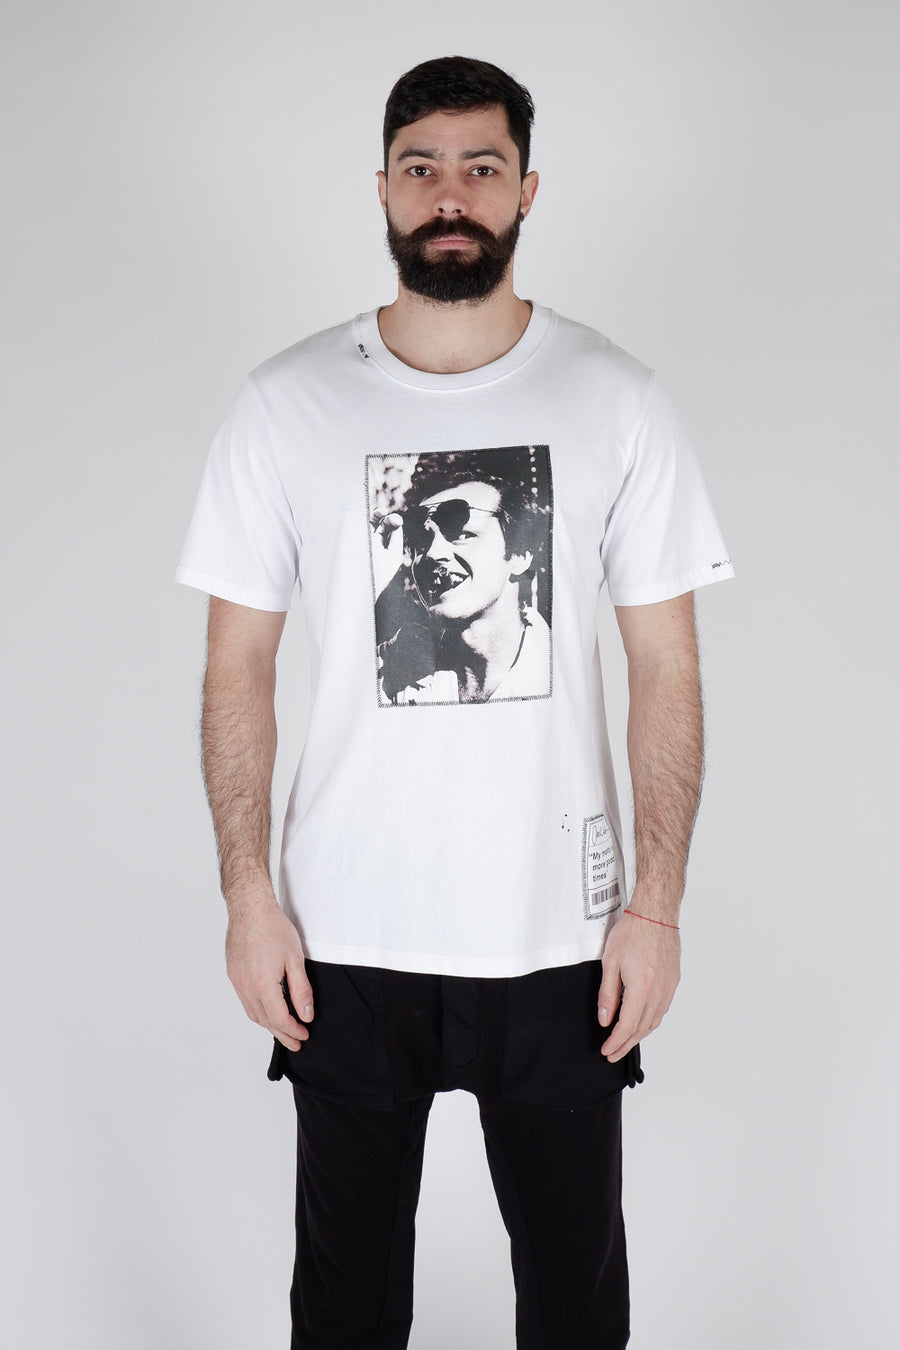 Buy the ABE  Young Jack T-Shirt in White  at Intro. Spend £50 for free UK delivery. Official stockists. We ship worldwide.